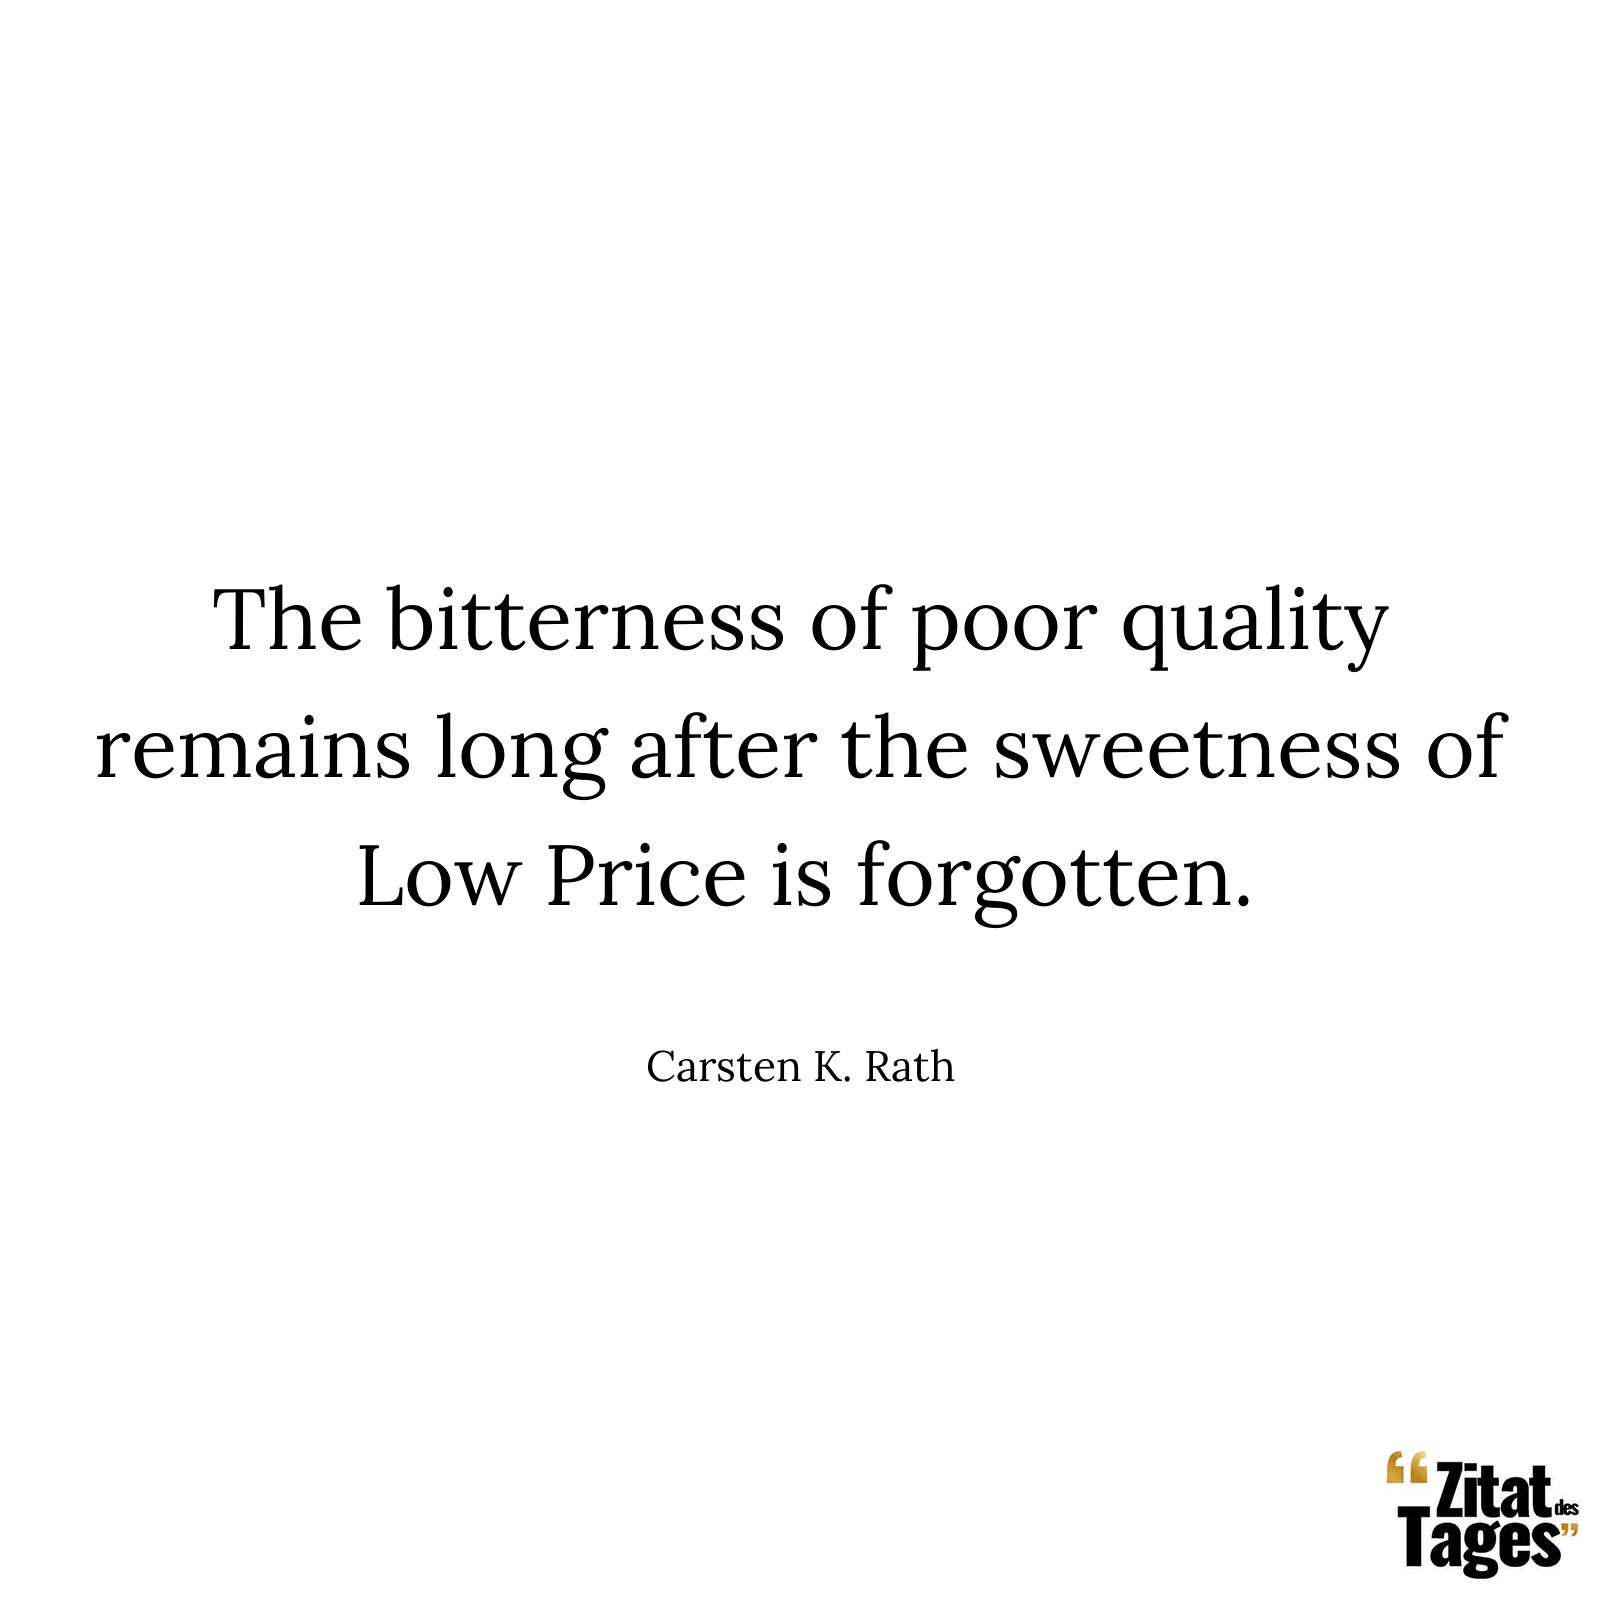 The bitterness of poor quality remains long after the sweetness of Low Price is forgotten. - Carsten K. Rath